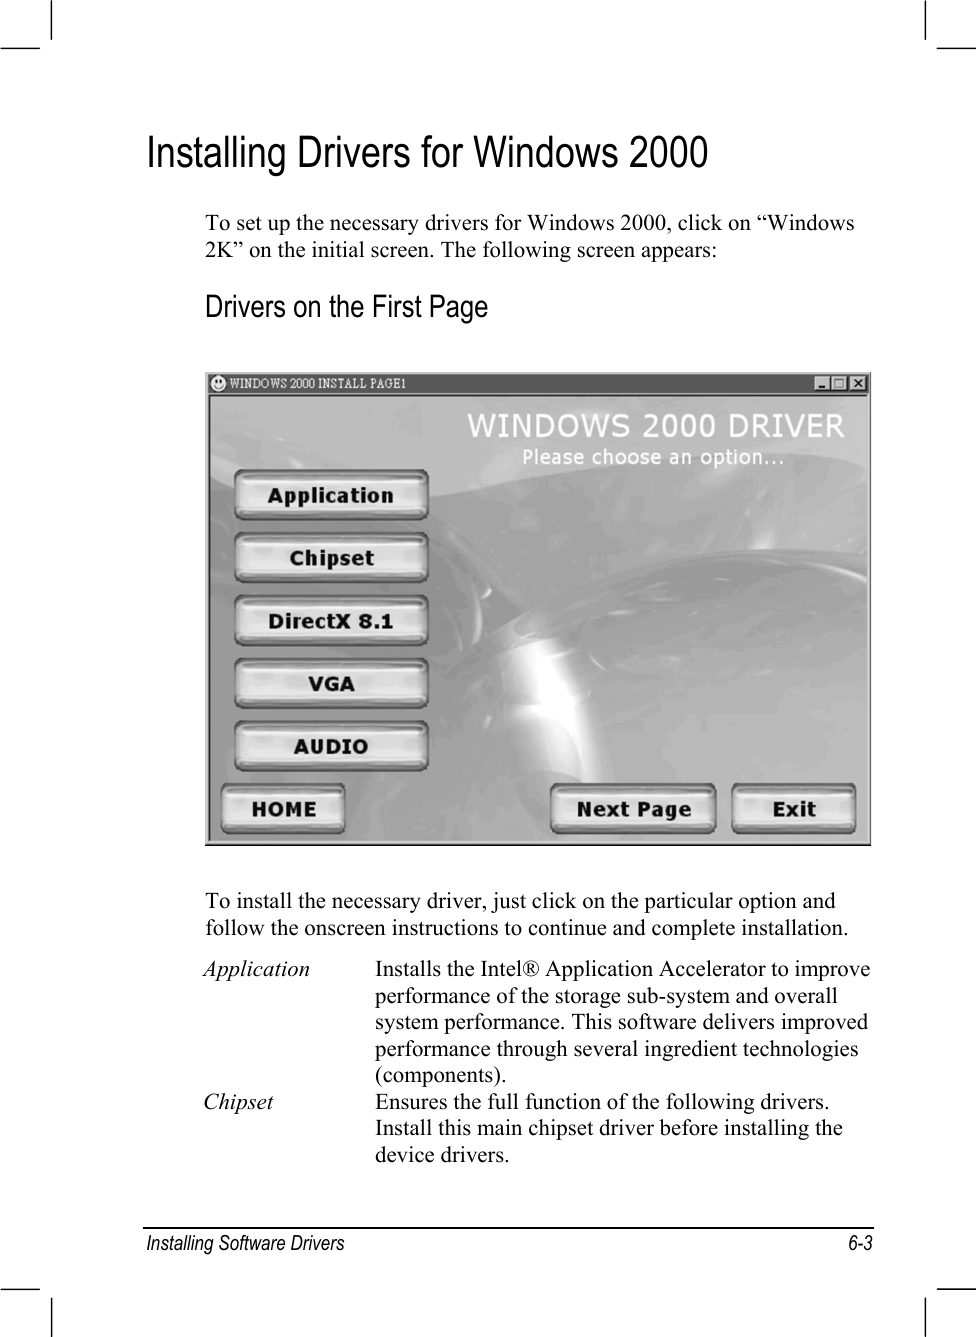 Installing Software Drivers 6-3Installing Drivers for Windows 2000To set up the necessary drivers for Windows 2000, click on “Windows2K” on the initial screen. The following screen appears:Drivers on the First PageTo install the necessary driver, just click on the particular option andfollow the onscreen instructions to continue and complete installation.Application Installs the Intel® Application Accelerator to improveperformance of the storage sub-system and overallsystem performance. This software delivers improvedperformance through several ingredient technologies(components).Chipset Ensures the full function of the following drivers.Install this main chipset driver before installing thedevice drivers.